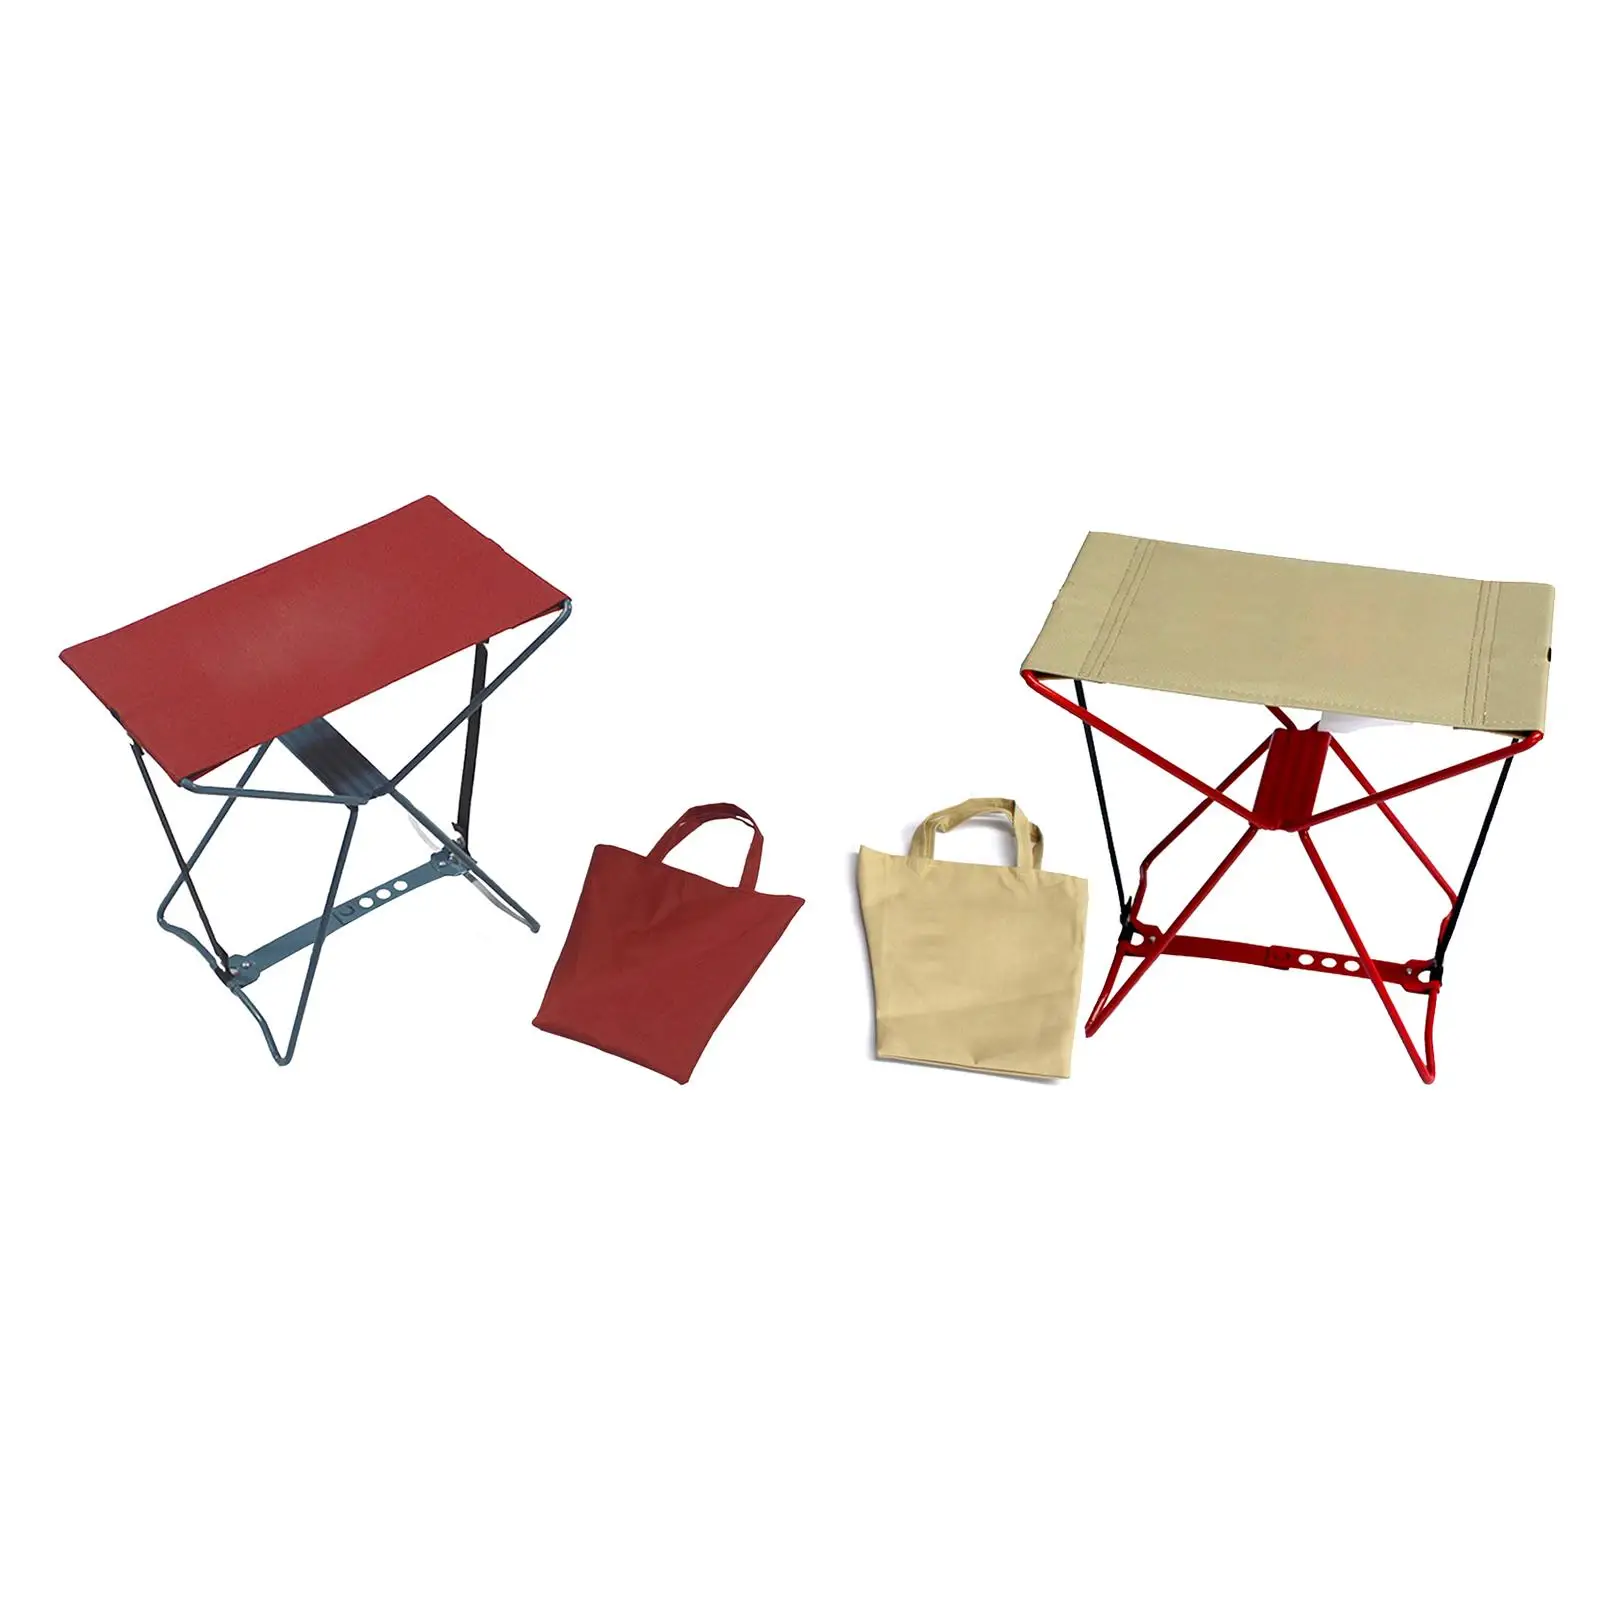 Folding Fishing Stool Collapsible Durable Fishing Chair Folding Chair for Hunting Hiking Bedroom Music Festival Backyard Party